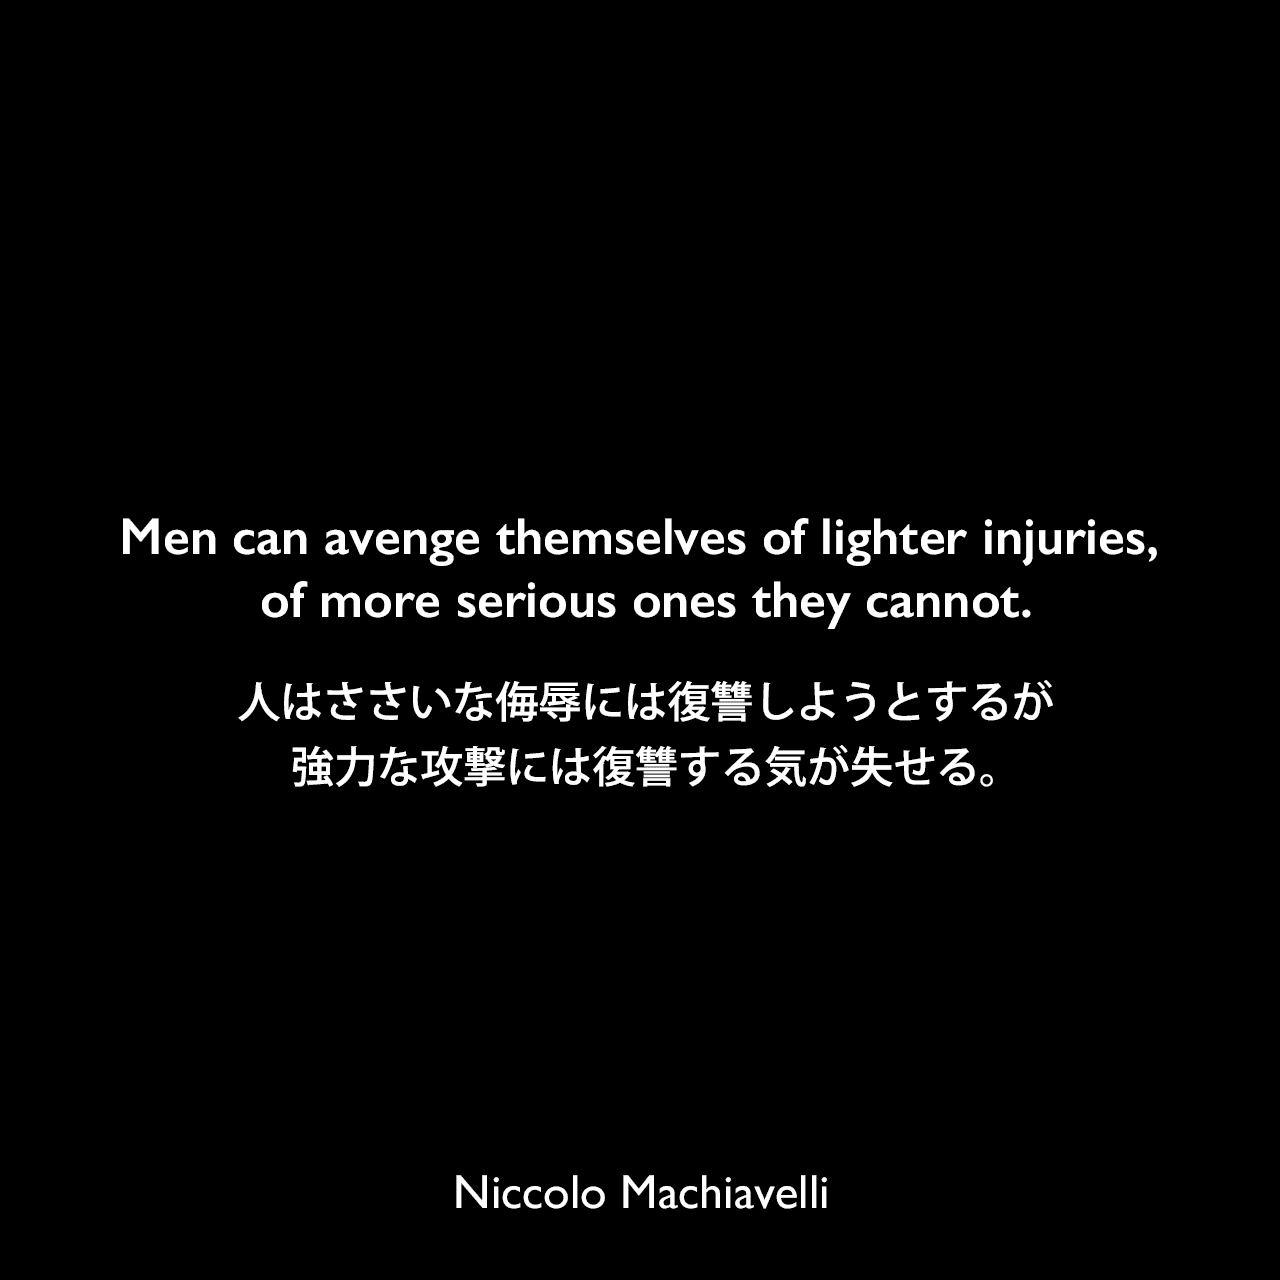 Men can avenge themselves of lighter injuries, of more serious ones they cannot.人はささいな侮辱には復讐しようとするが、強力な攻撃には復讐する気が失せる。Niccolo Machiavelli